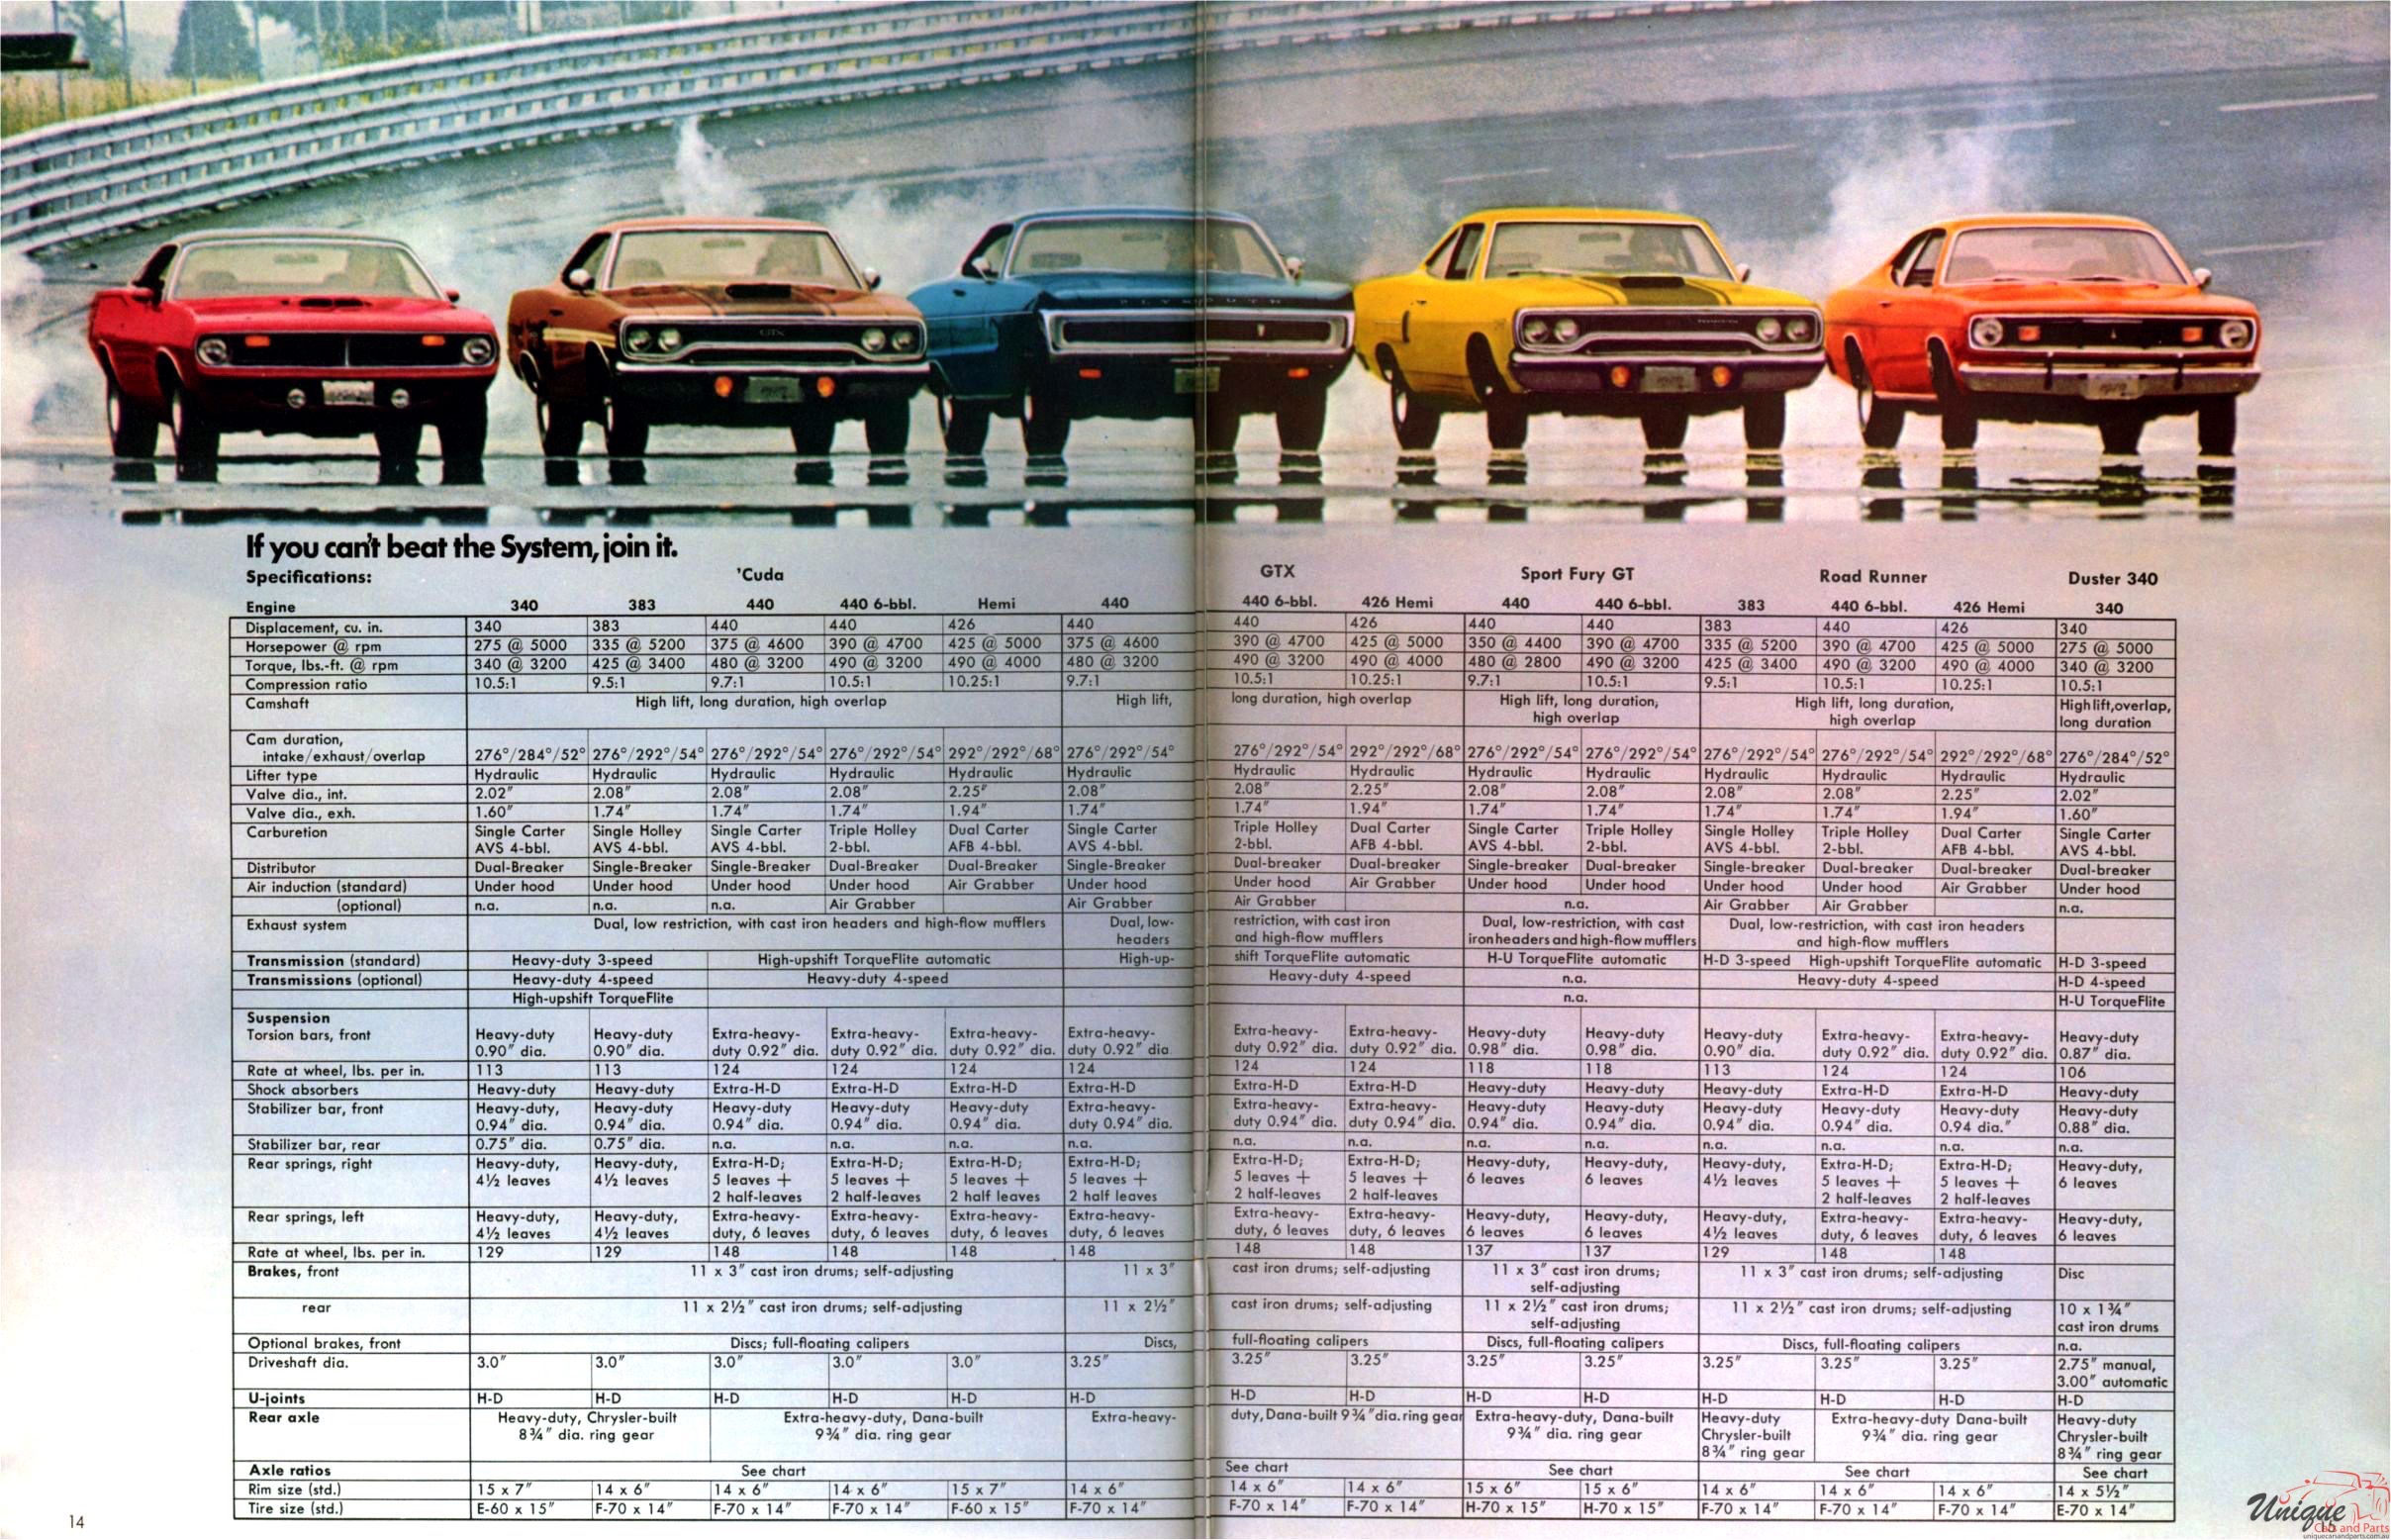 1970 Plymouth Rapid Transit System Brochure Page 11